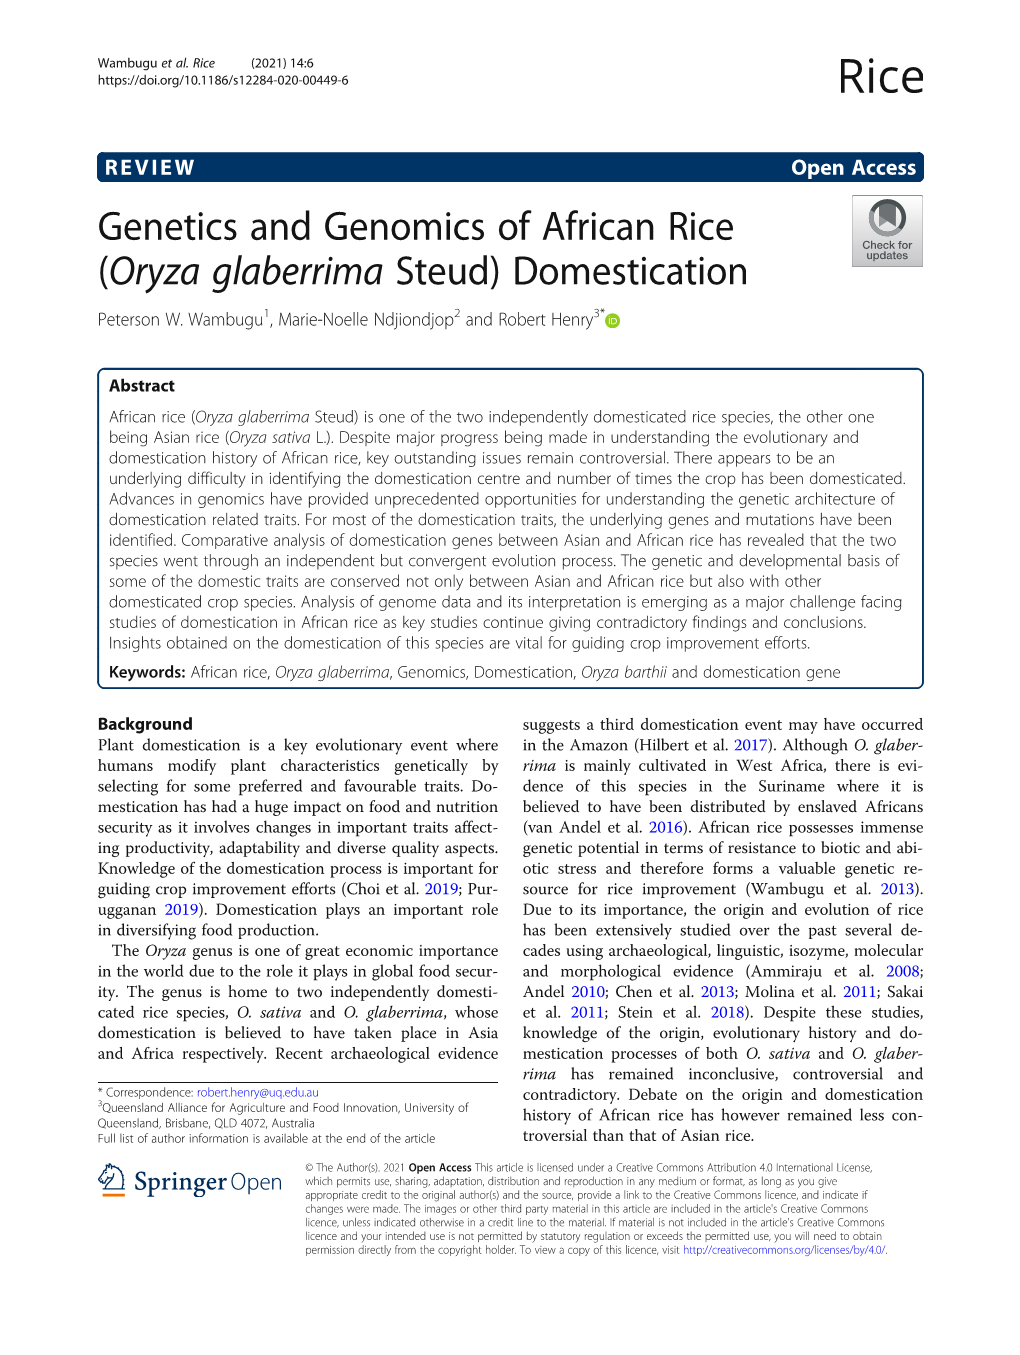 Genetics and Genomics of African Rice (Oryza Glaberrima Steud) Domestication Peterson W